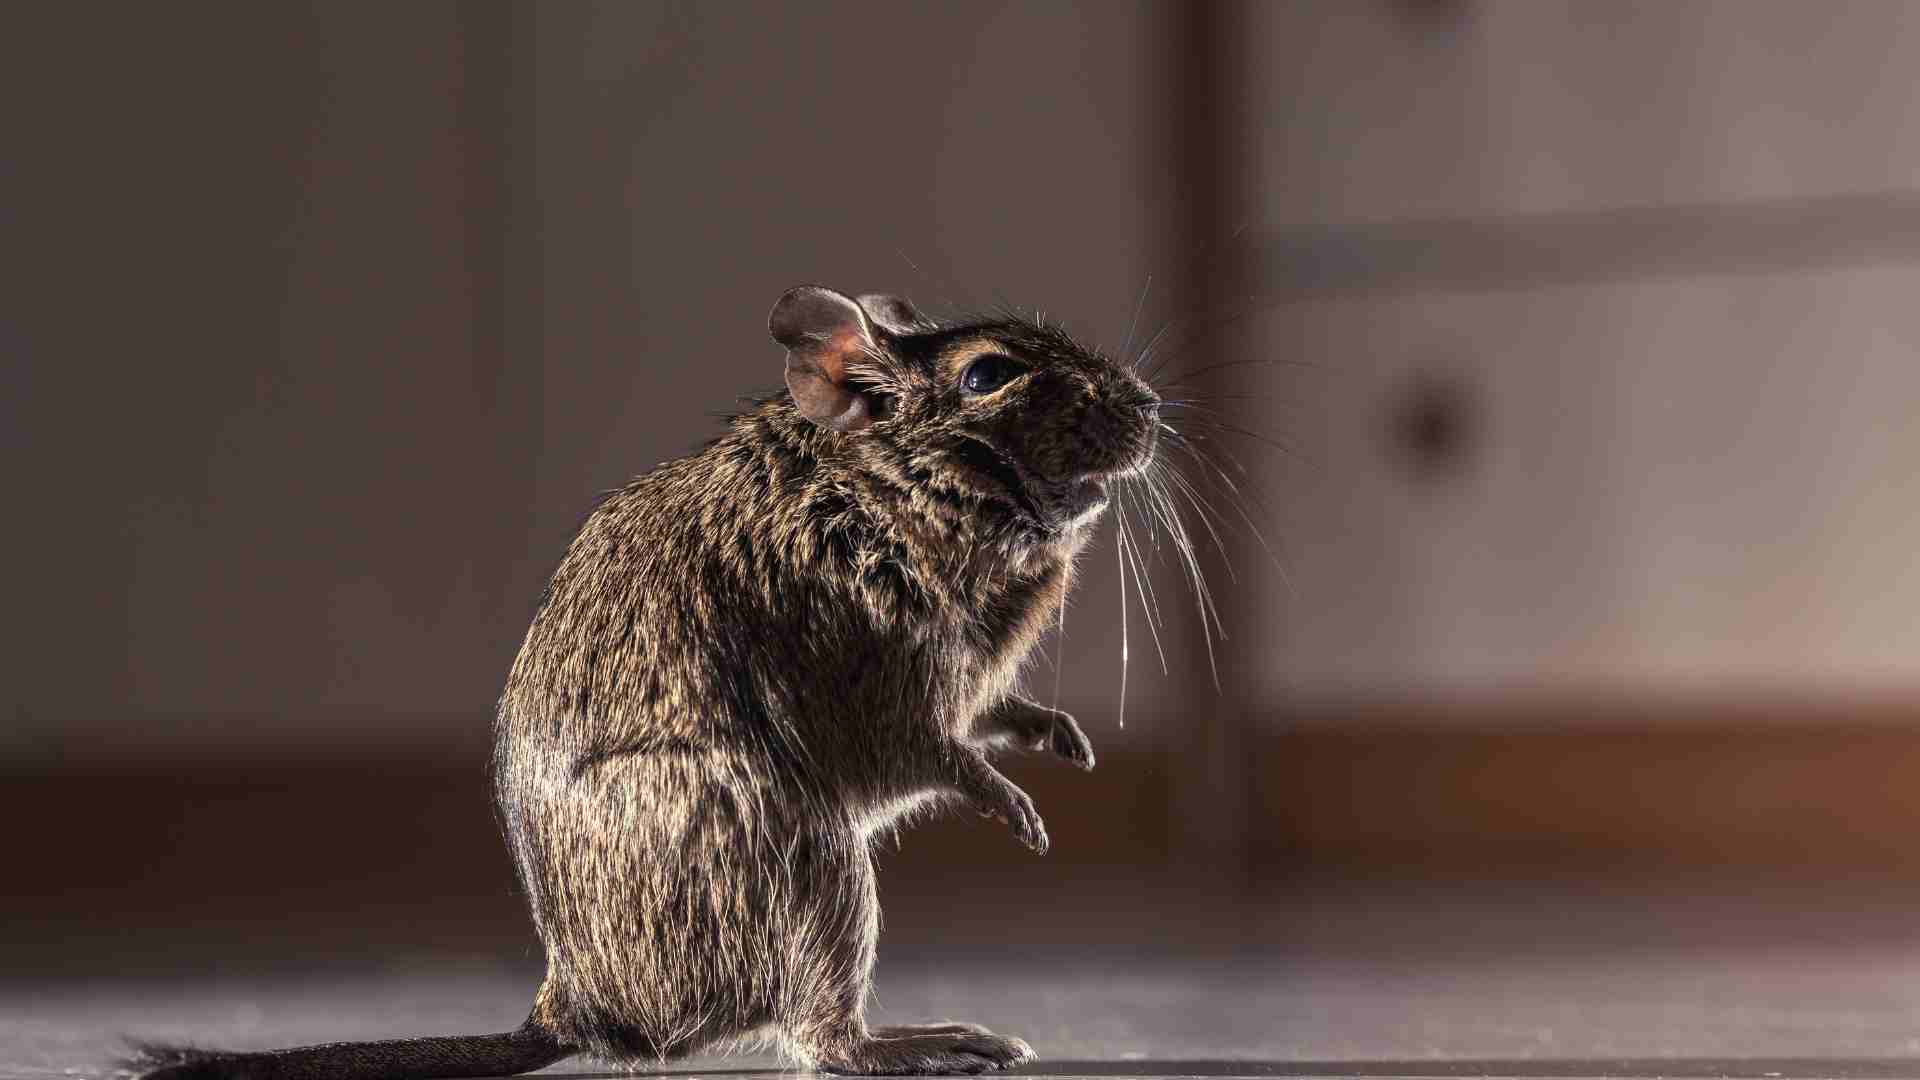 Rodent Control for Hygiene and Safety